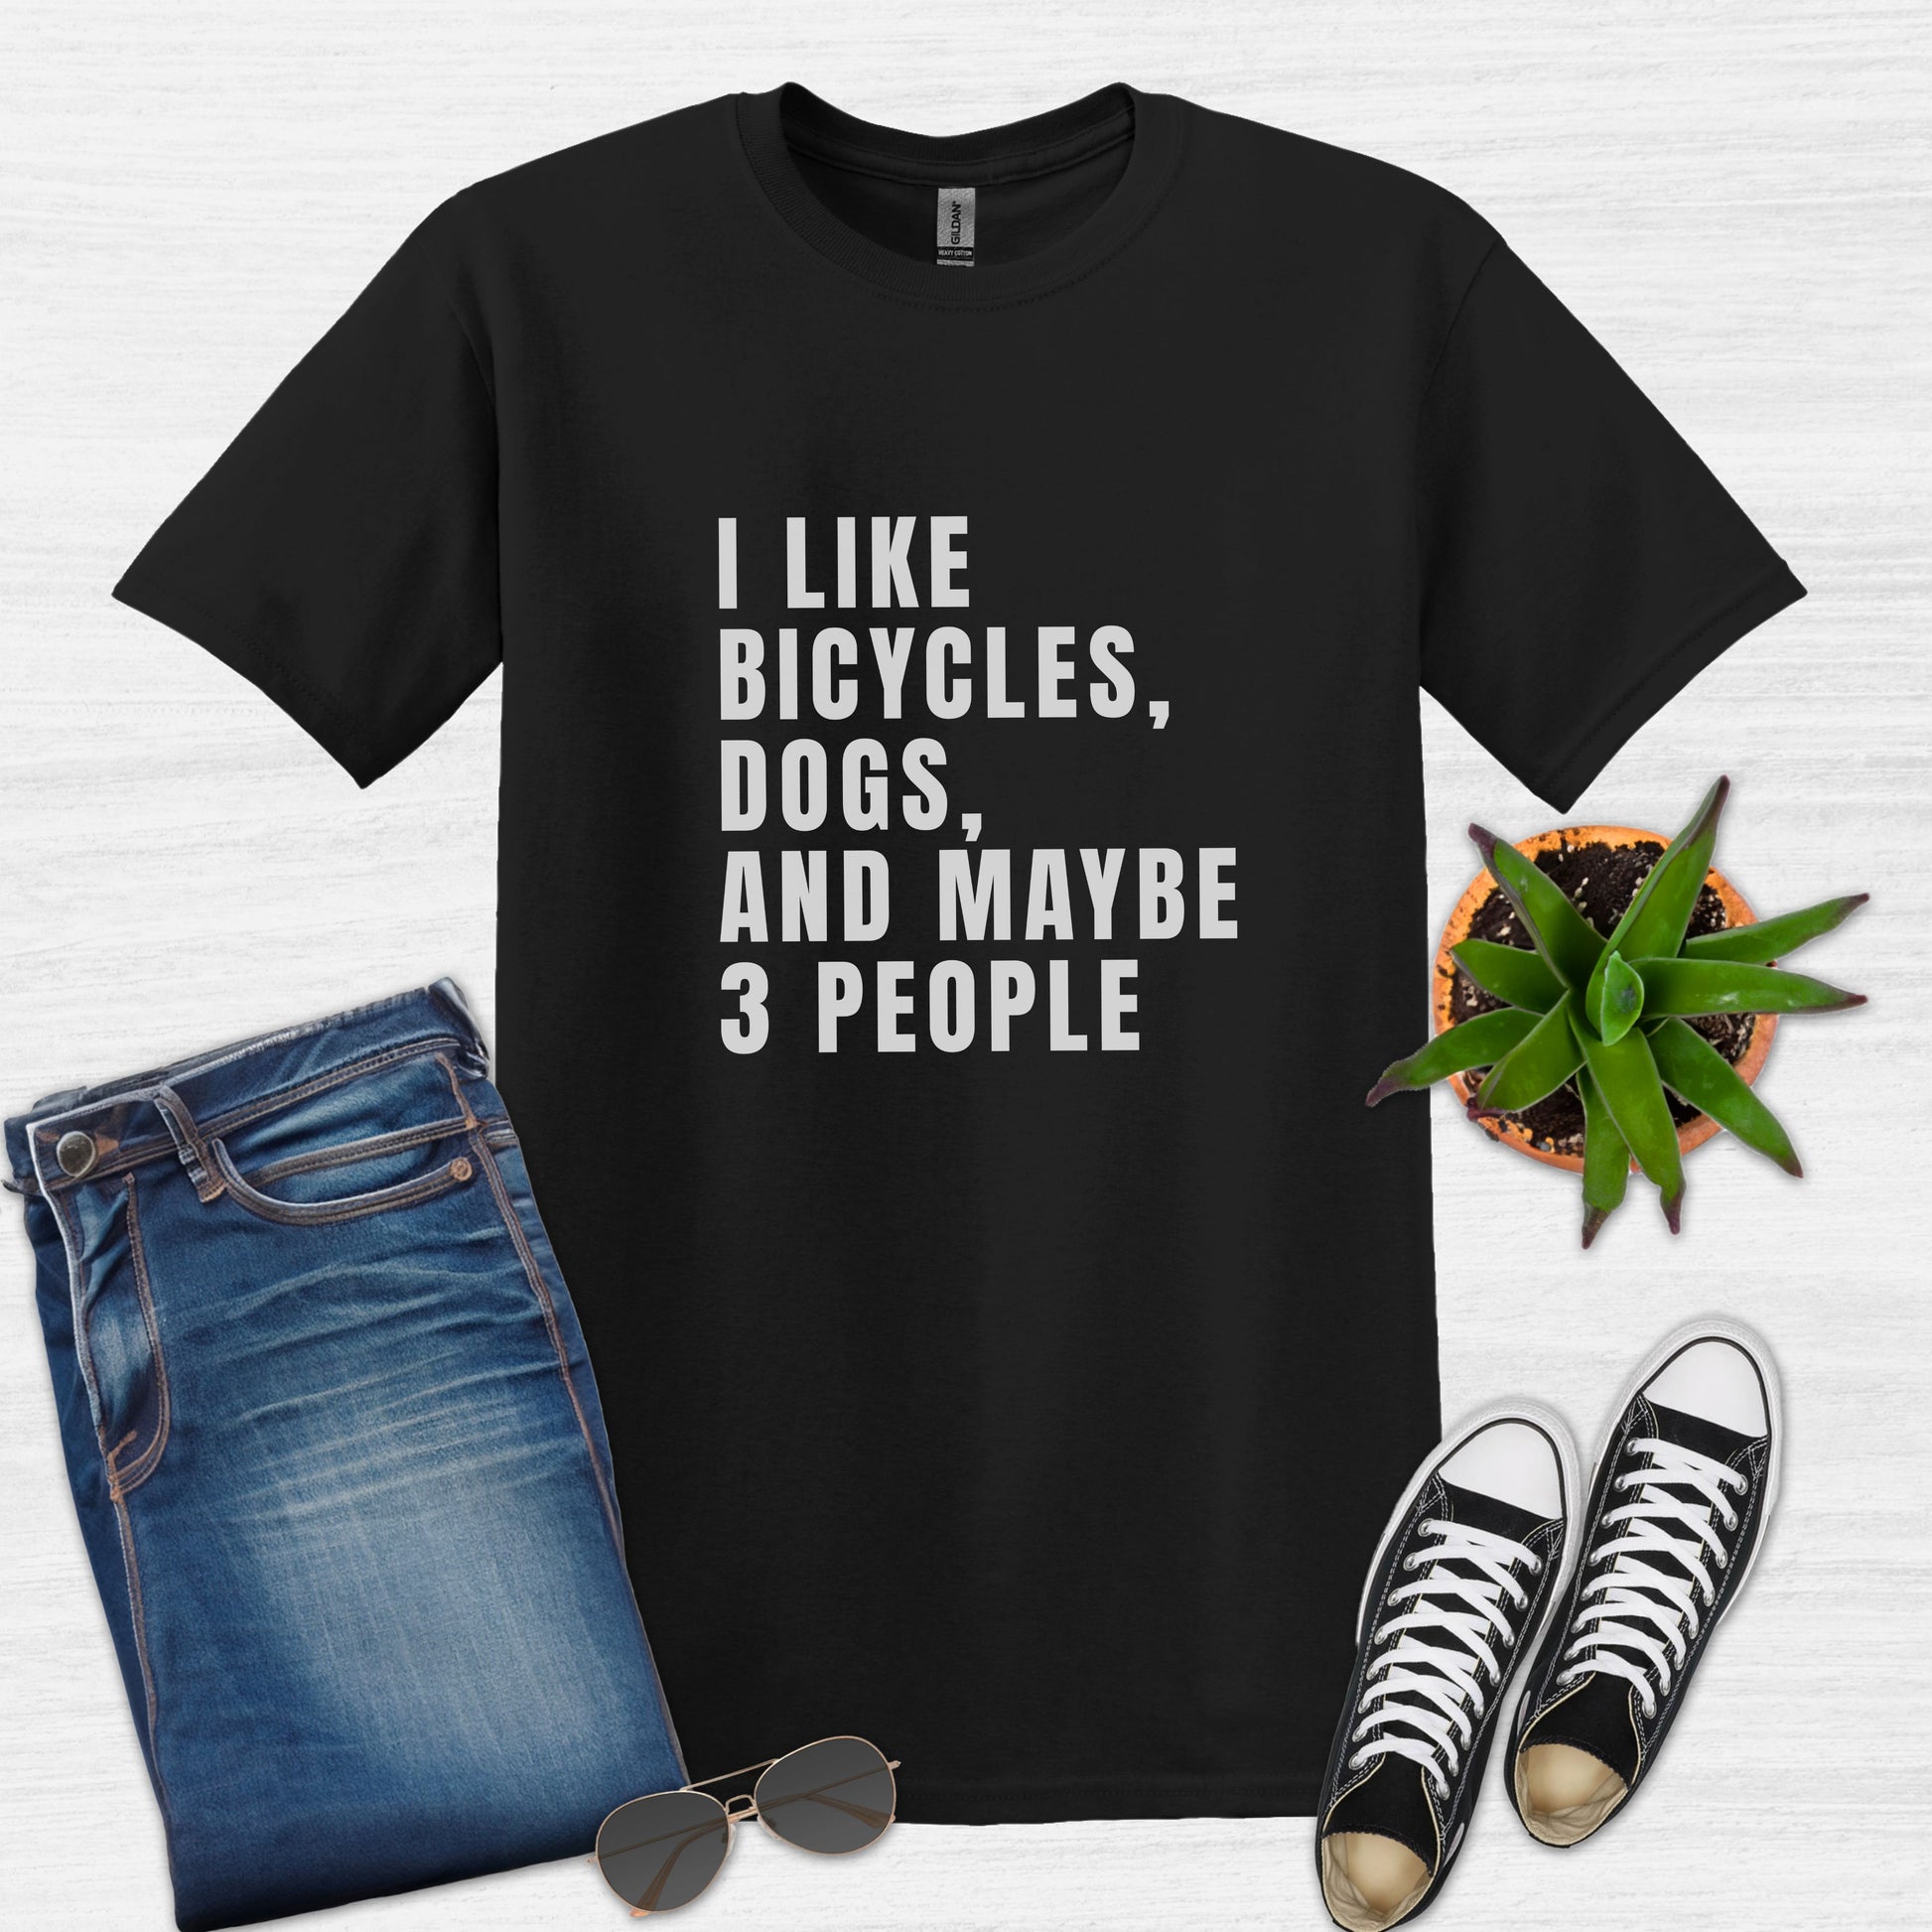 Bike Bliss I Like bicycles dogs and maybe 3 people T-Shirt for men Black